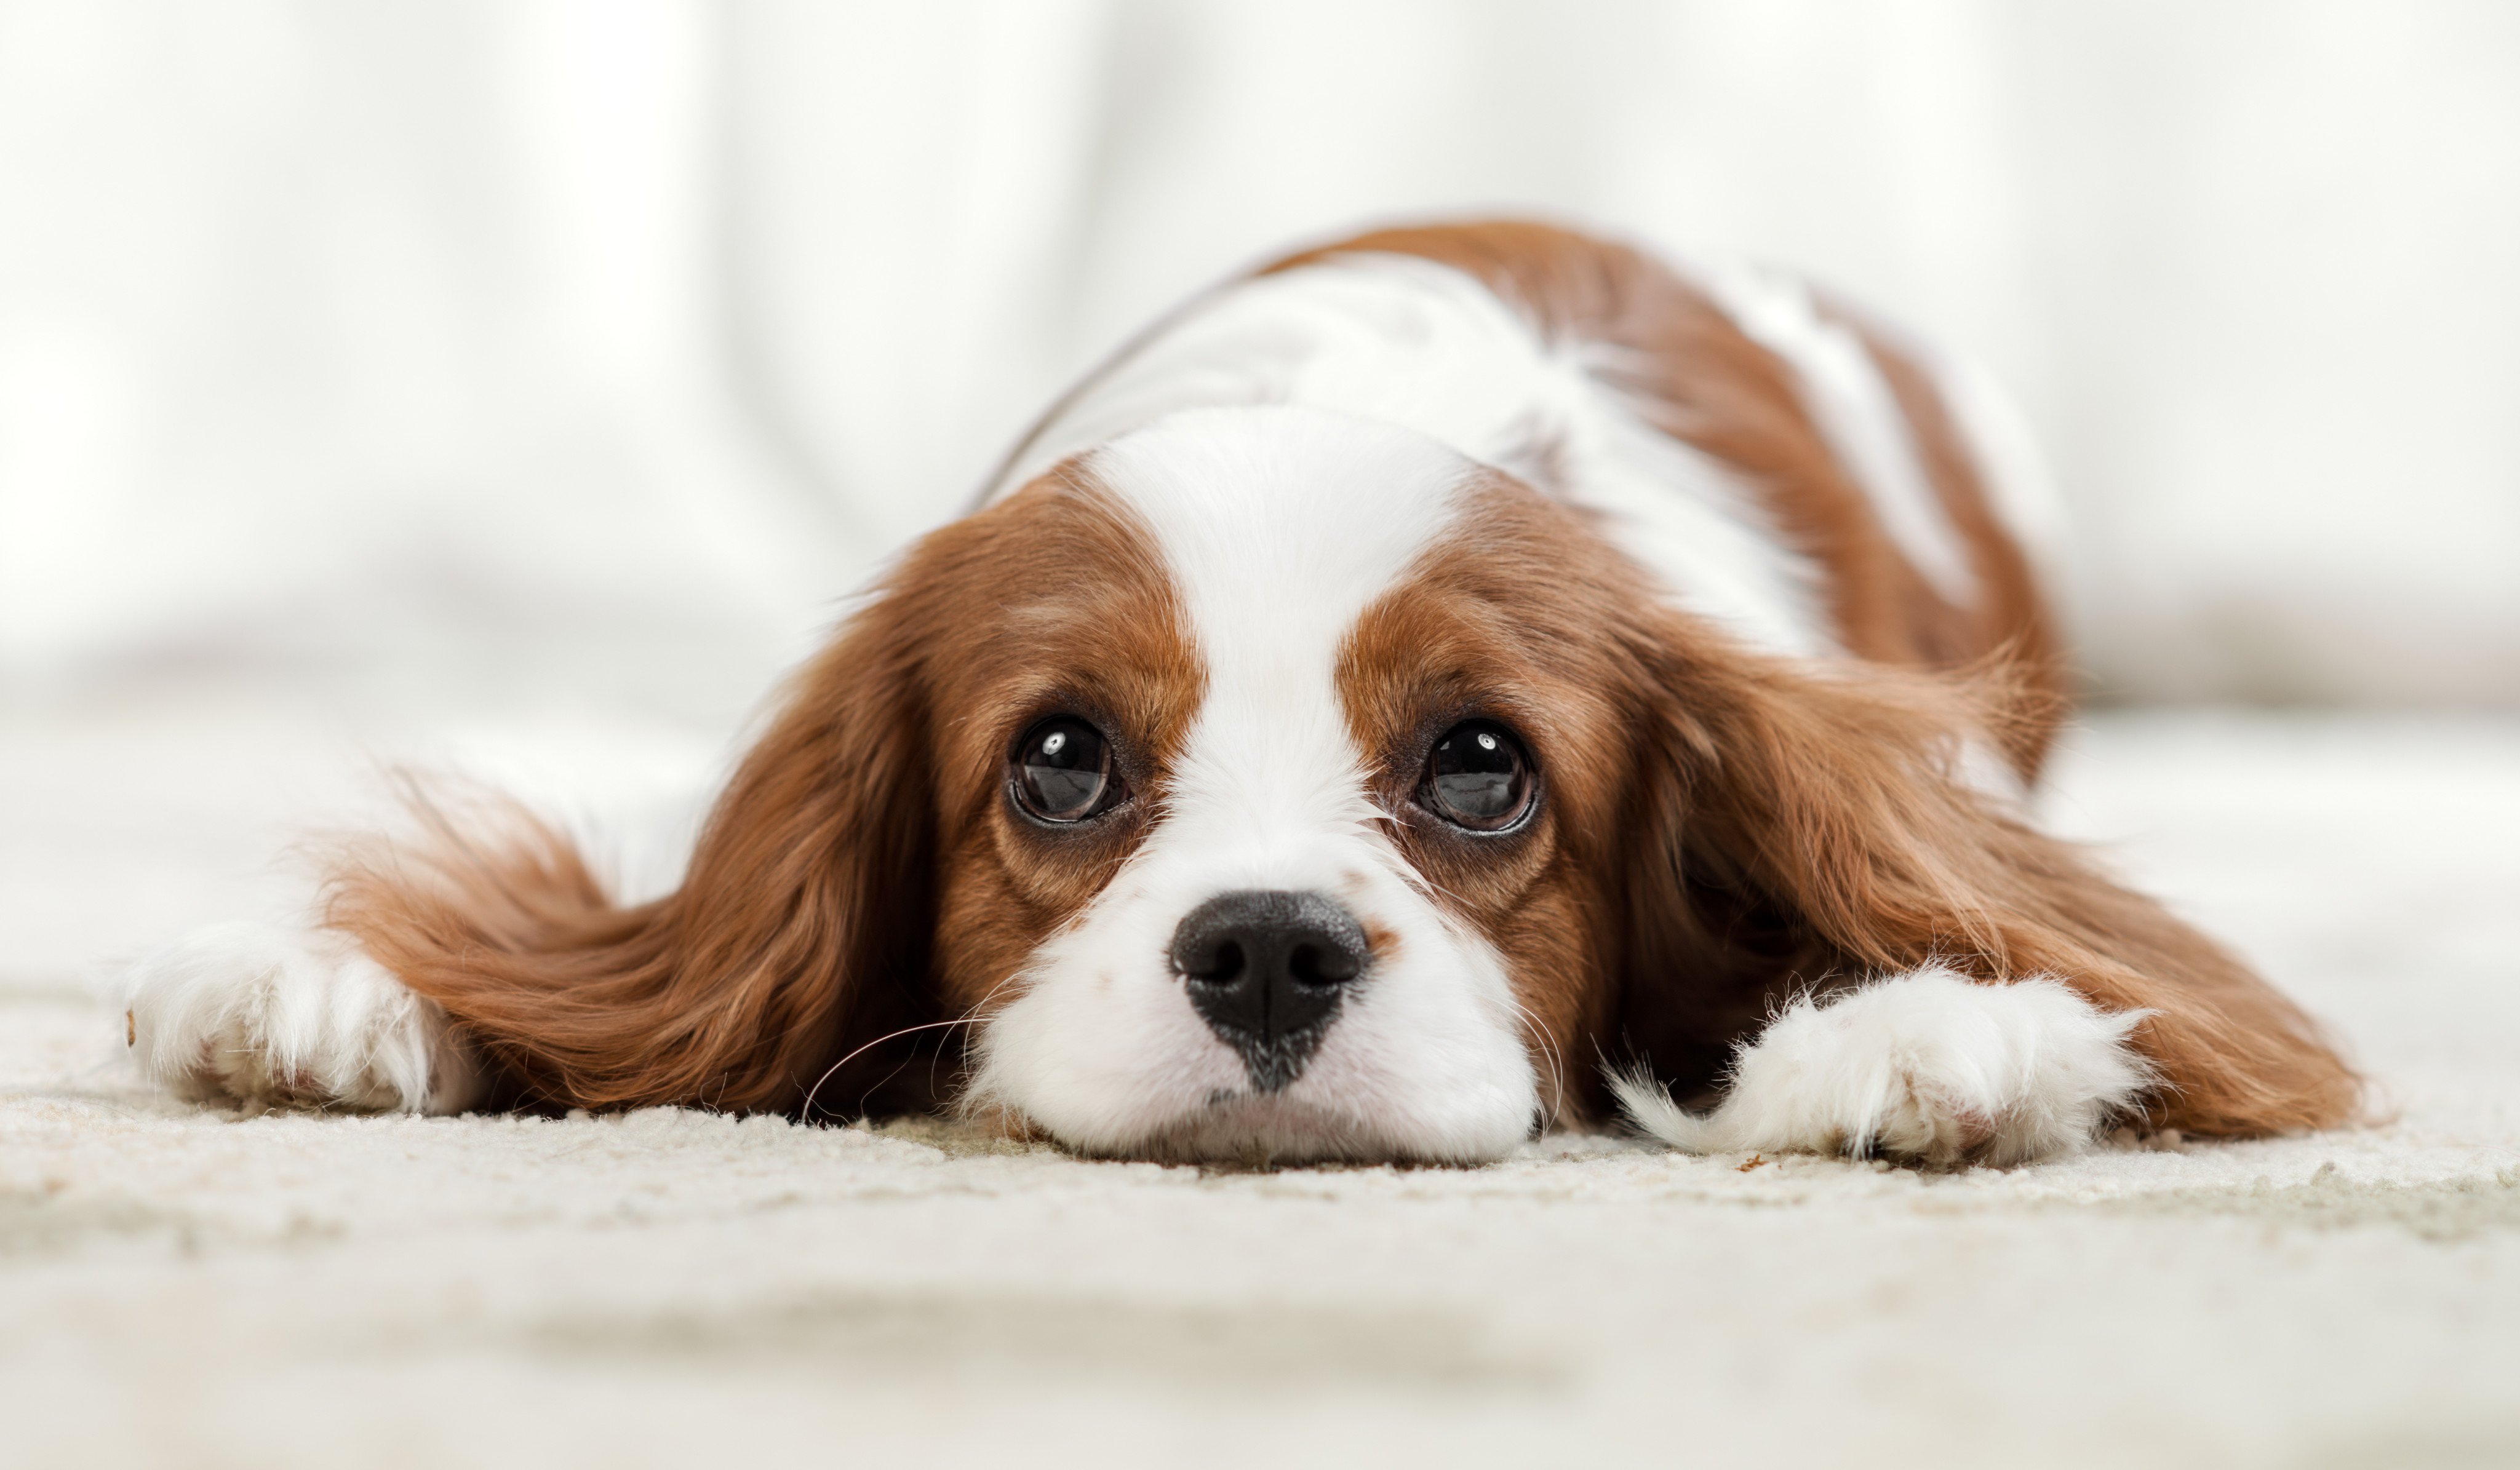 Pets bring many of us a great deal of joy and love, so losing them can be akin to losing a human family member. Mental health and animal experts explain how to manage grief and not suffer in silence. Photo: Shutterstock 